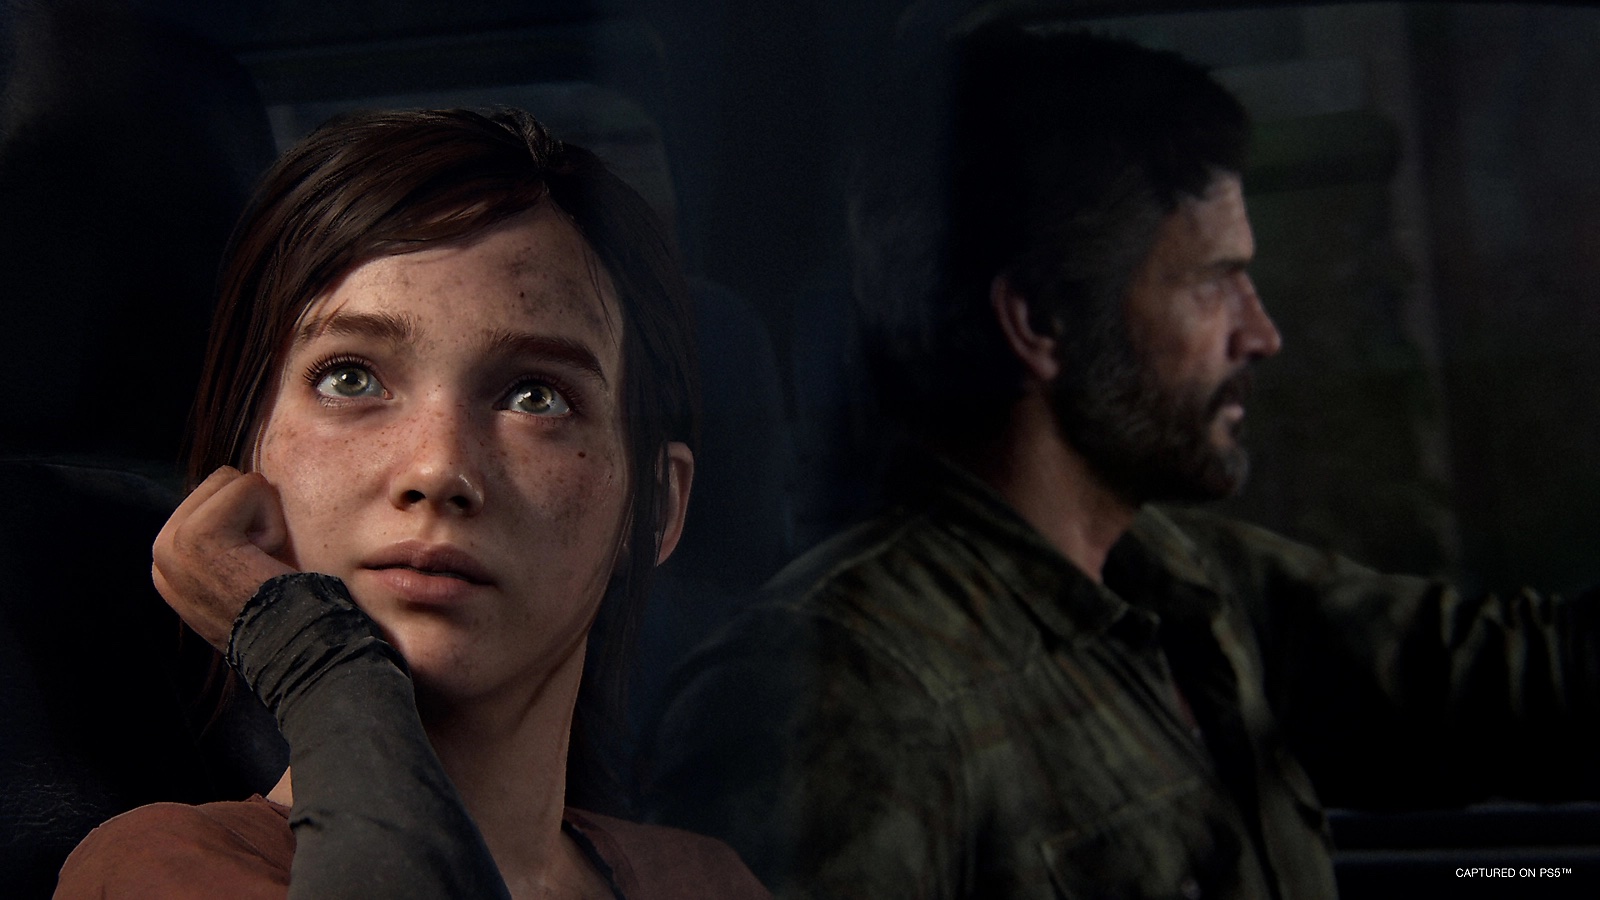 Ellie stares out a window as Joel drives in key art for The Last of Us Part 1.